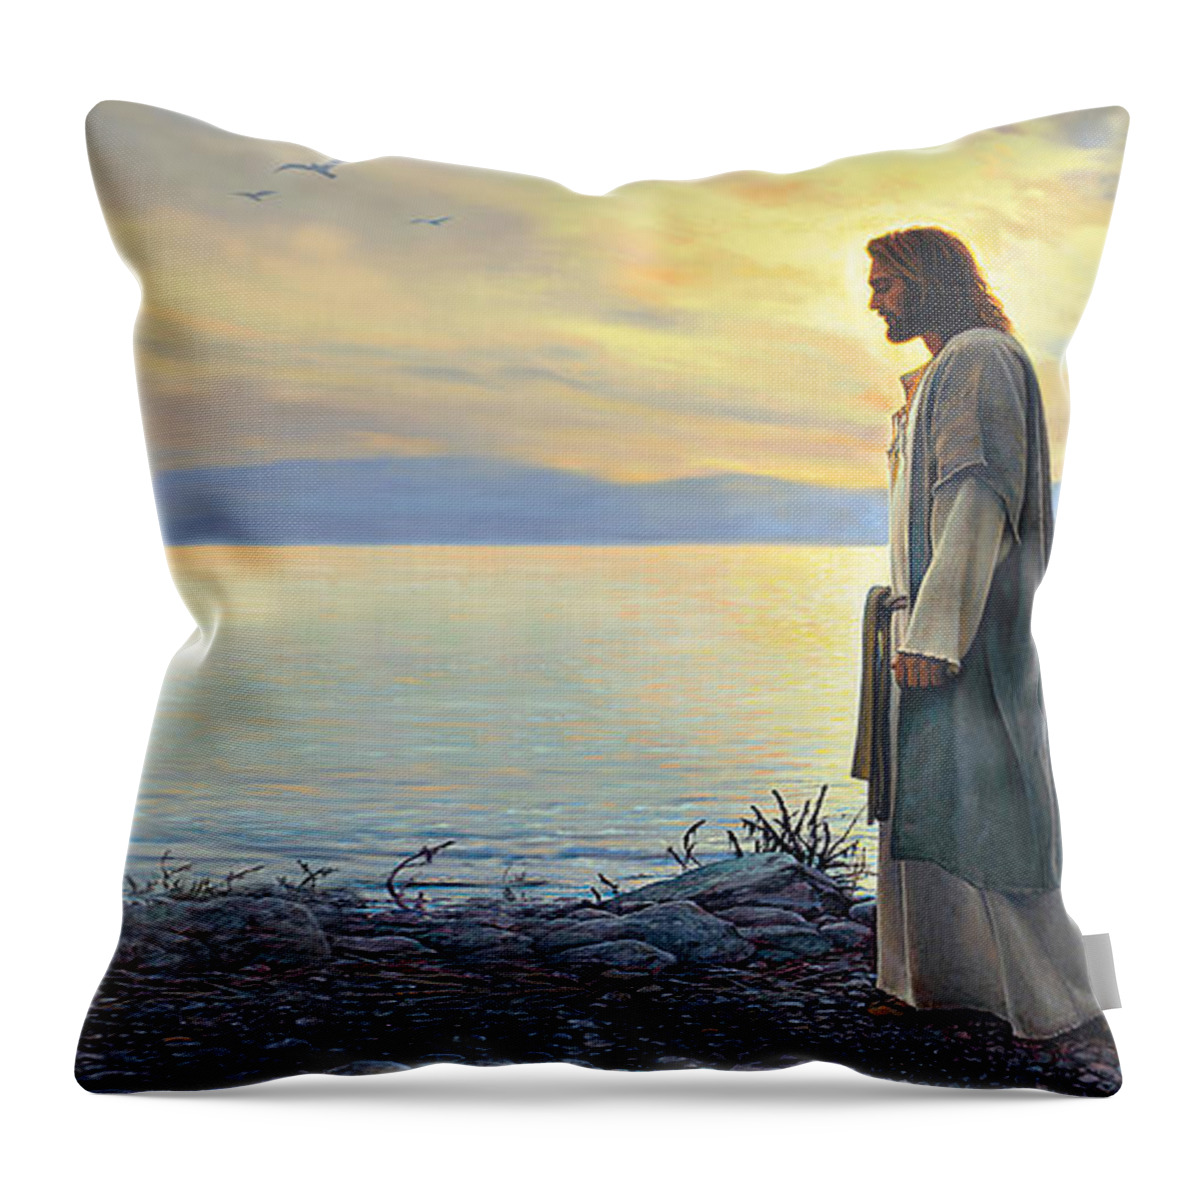 Jesus Throw Pillow featuring the painting Walk With Me by Greg Olsen